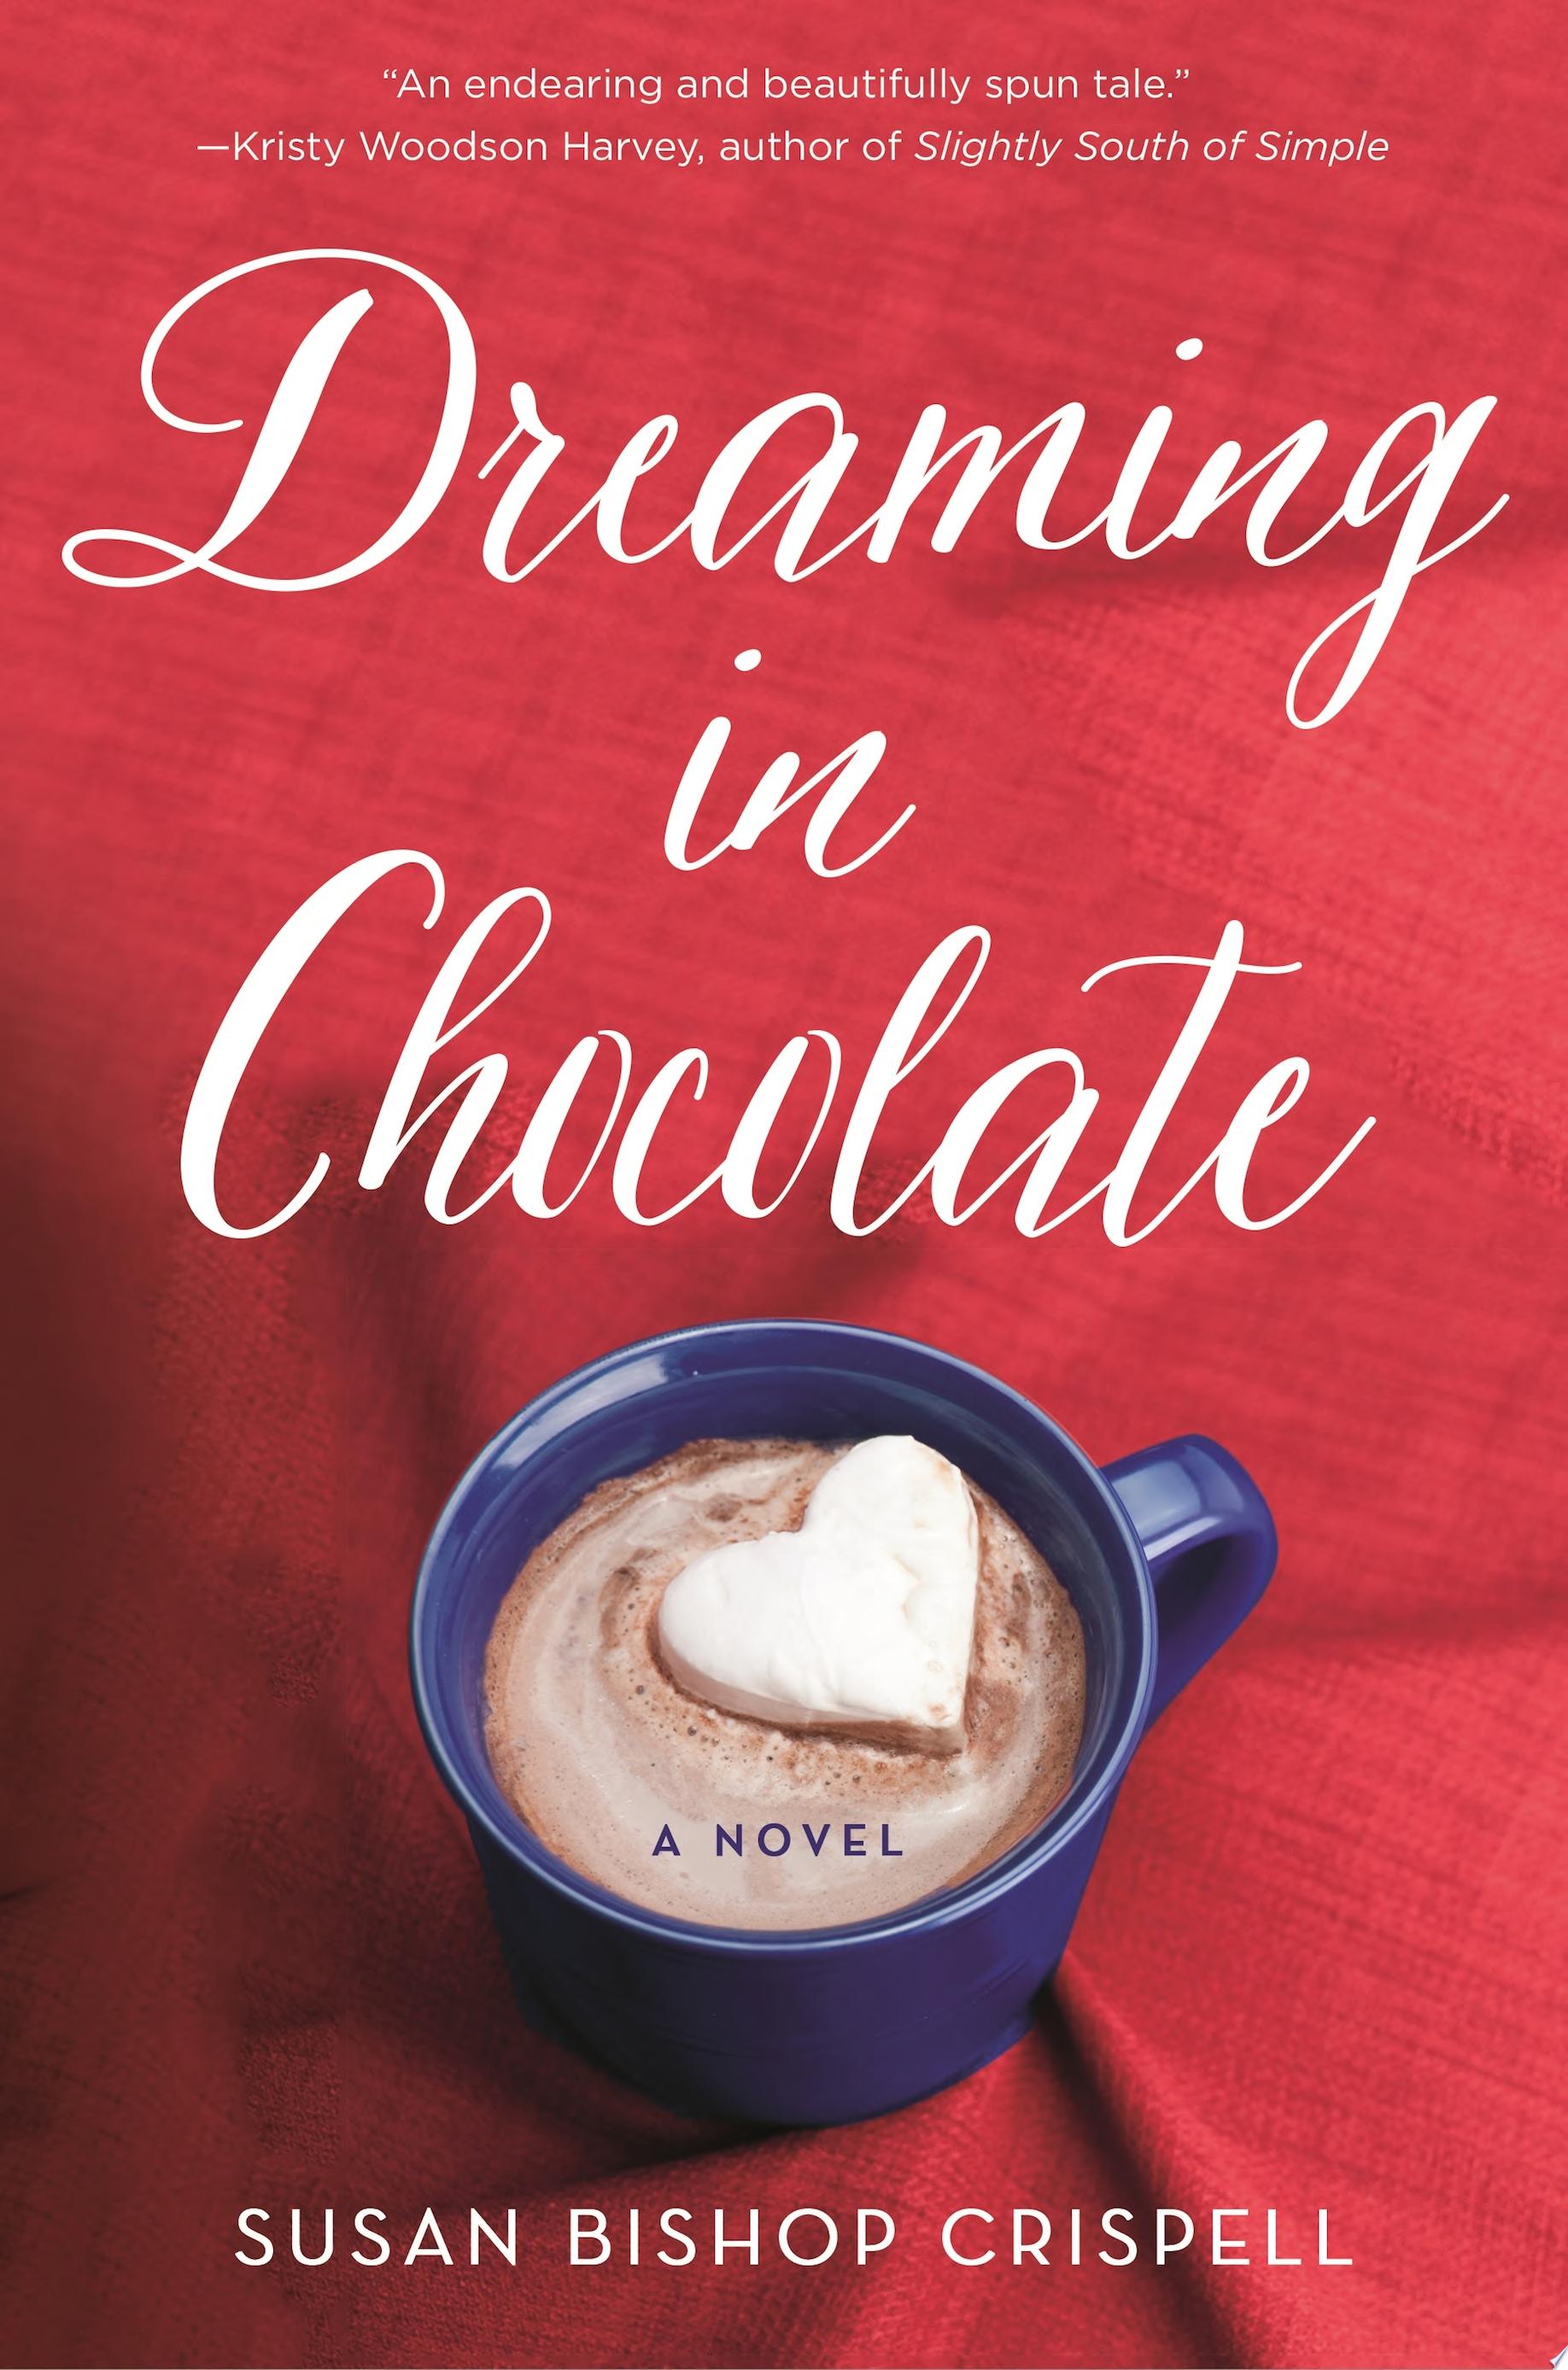 Image for "Dreaming in Chocolate"